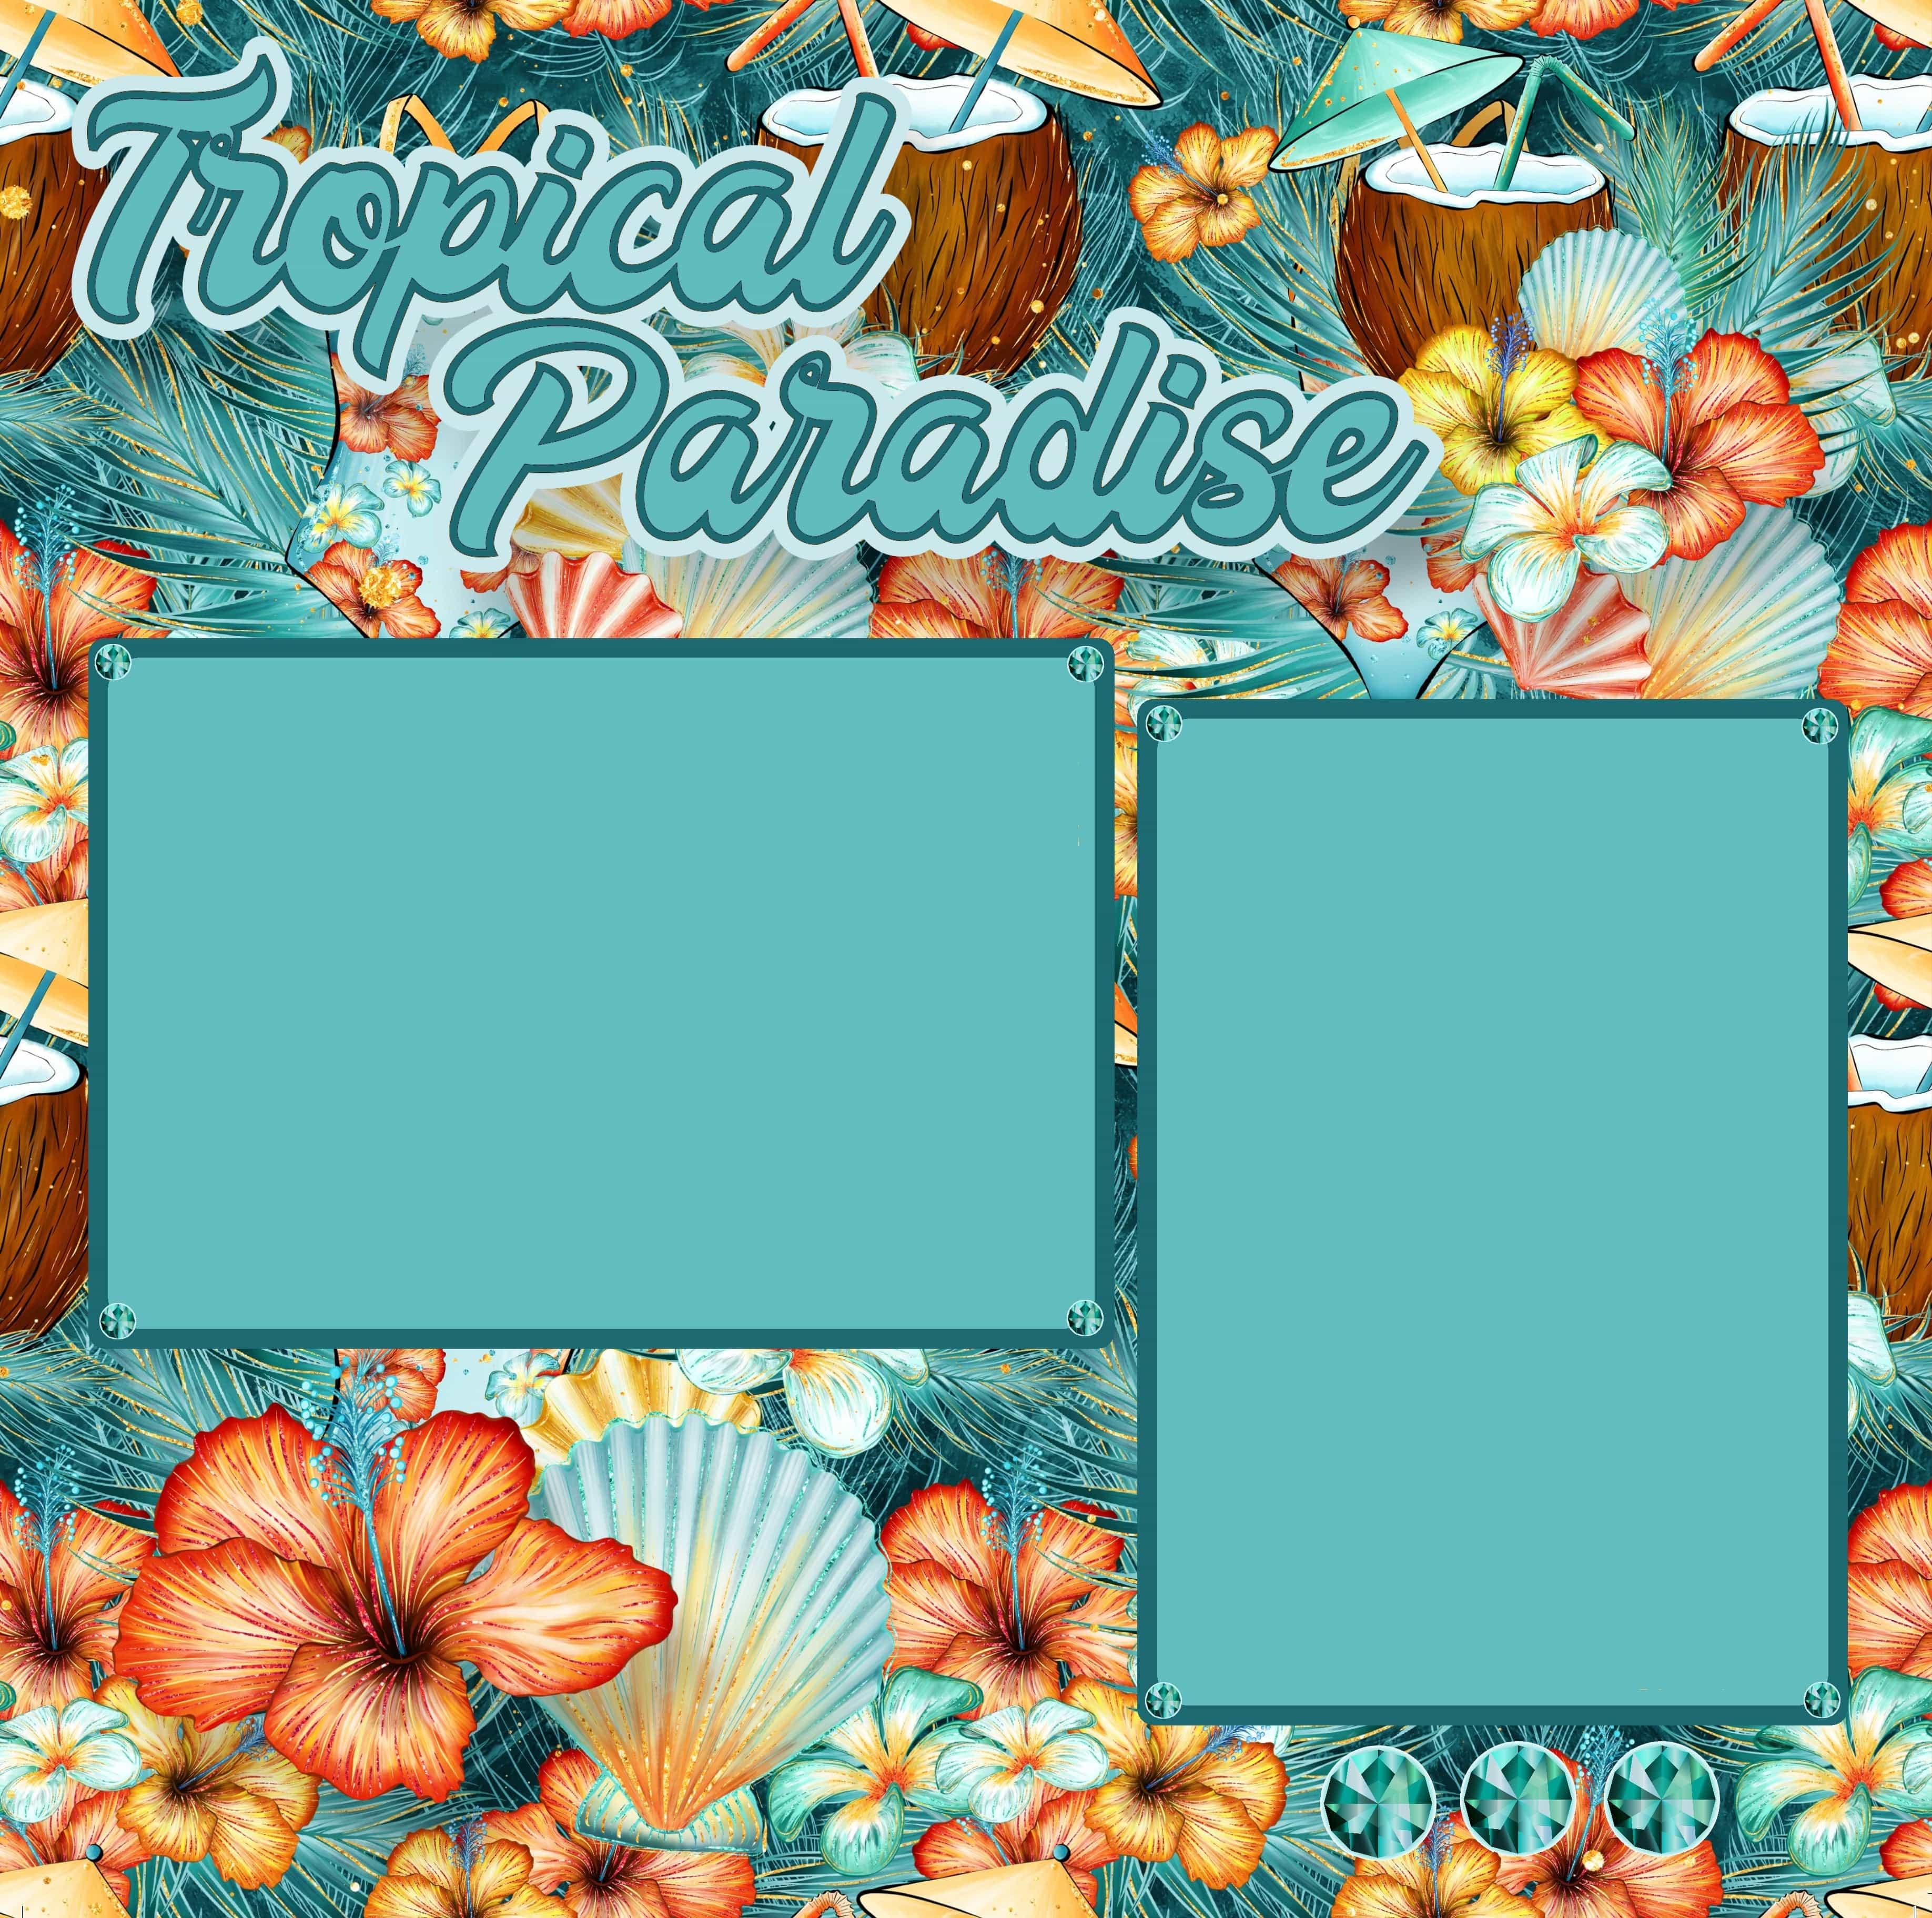 Tropical Paradise Coconuts (2) - 12 x 12 Premade, Printed Scrapbook Pages by SSC Designs - Scrapbook Supply Companies